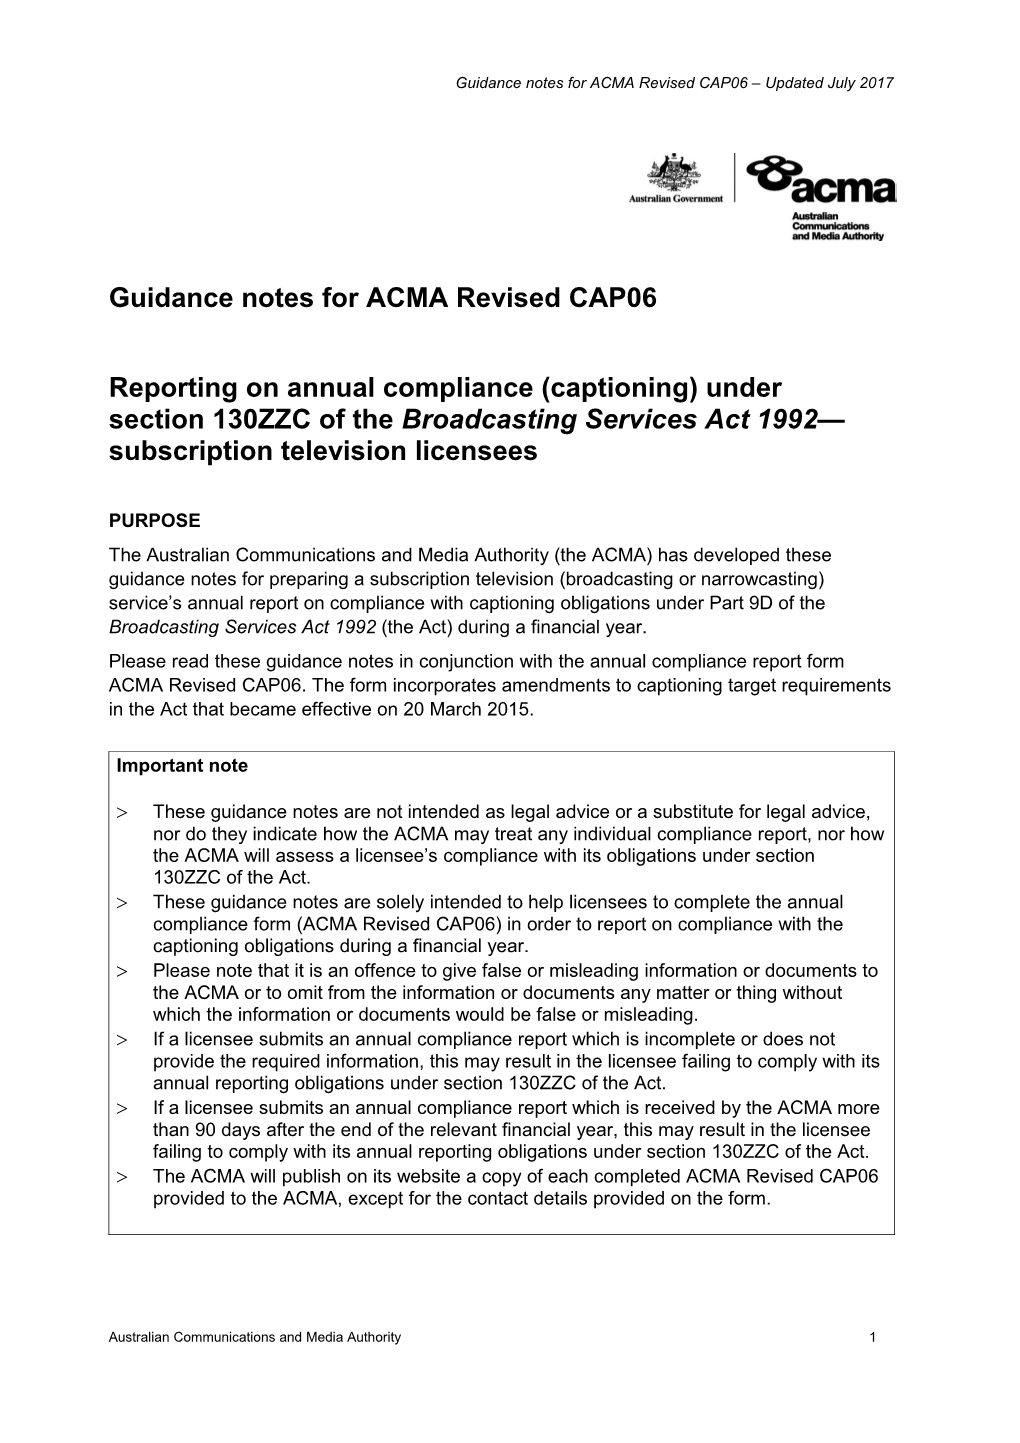 Guidance Notes for ACMA Revised CAP06